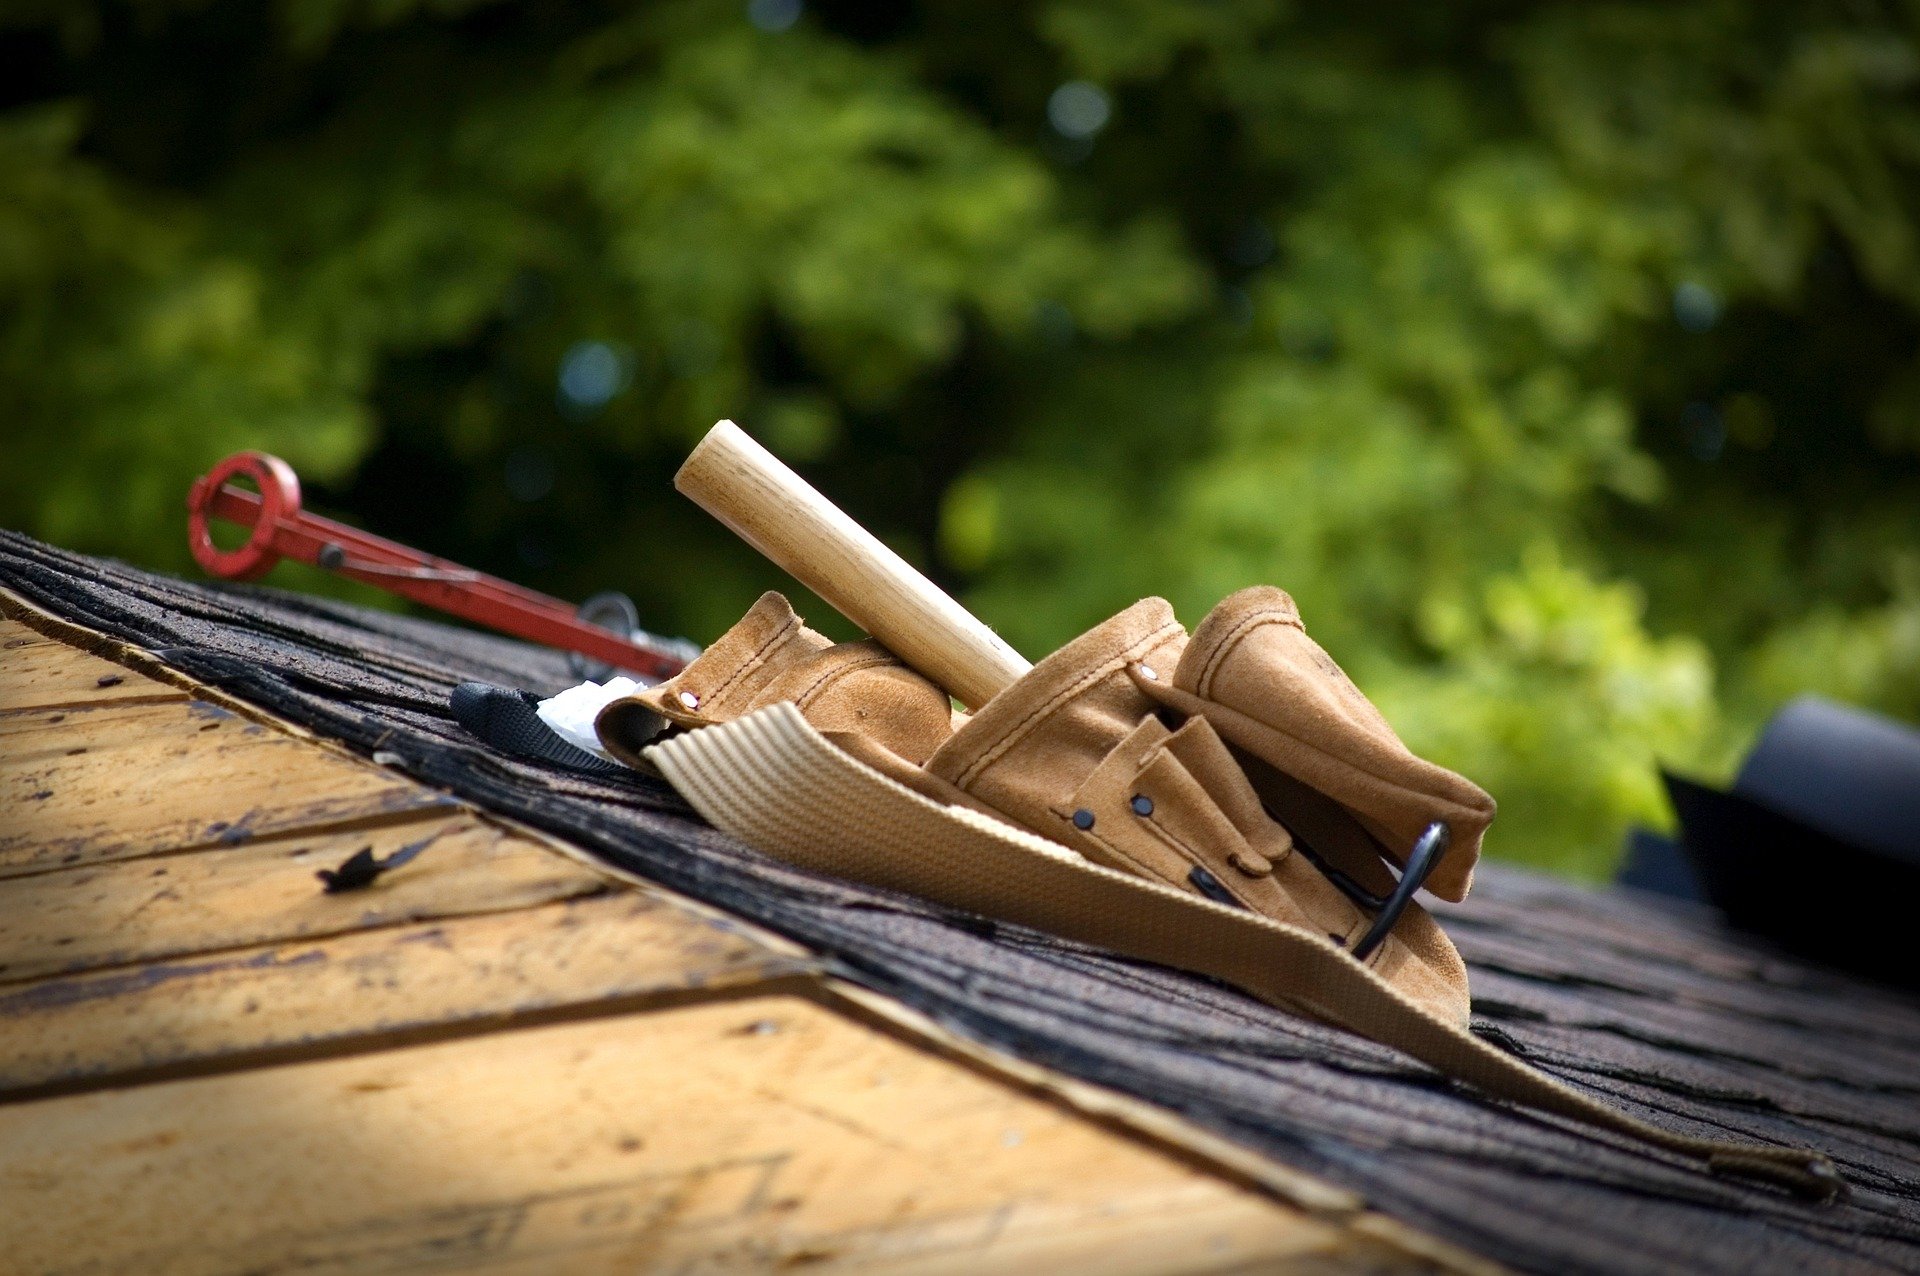 Roofing industry feels the heat of intensifying material and skill shortages